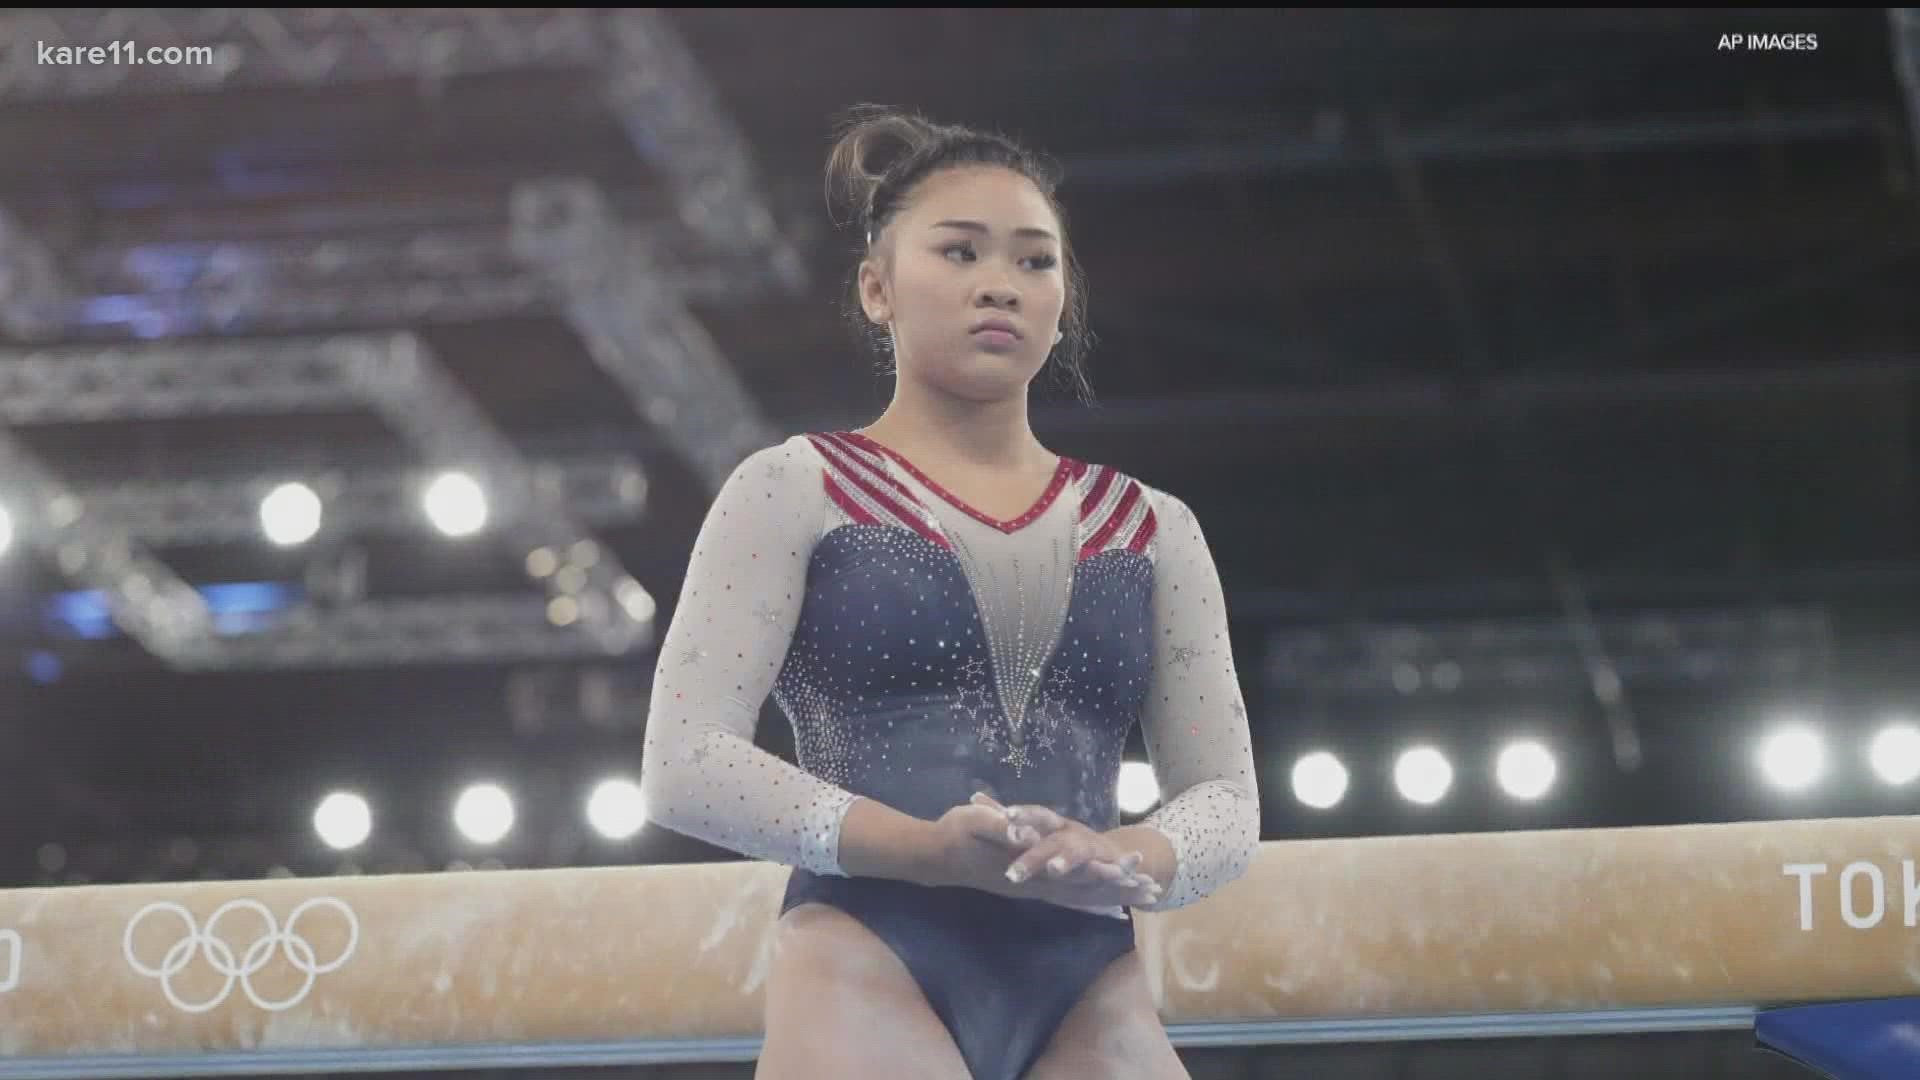 Lee is busy making history as an Auburn Tiger gymnast while navigating a full schedule.